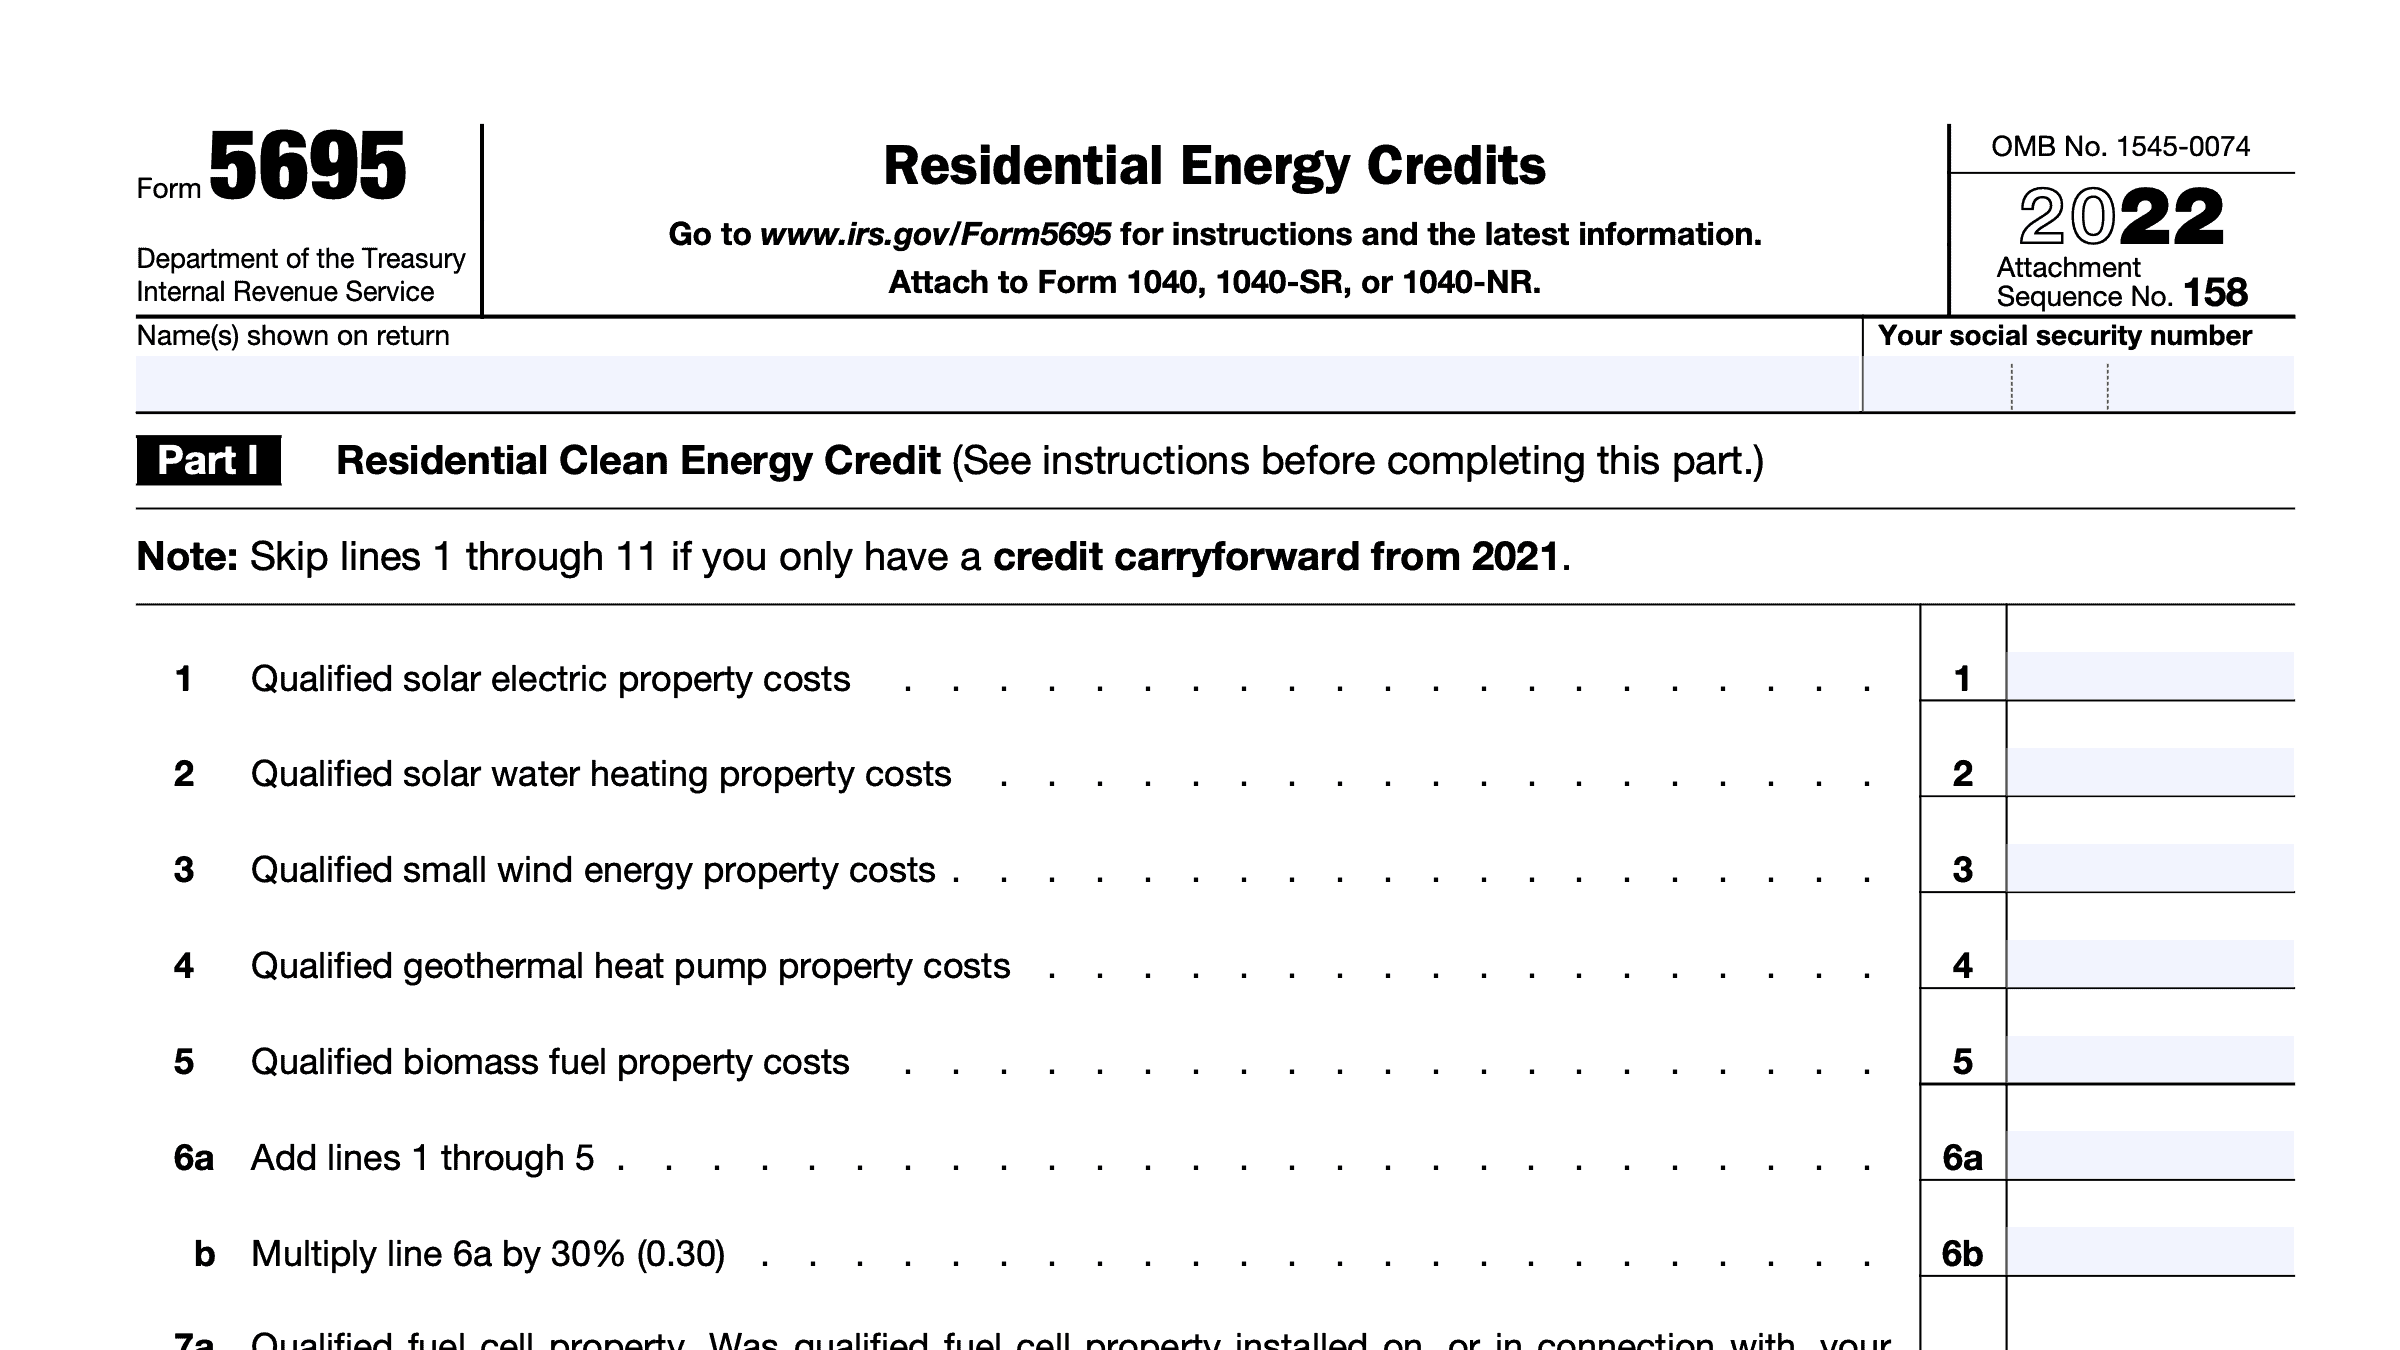 irs-form-5695-instructions-residential-energy-credits